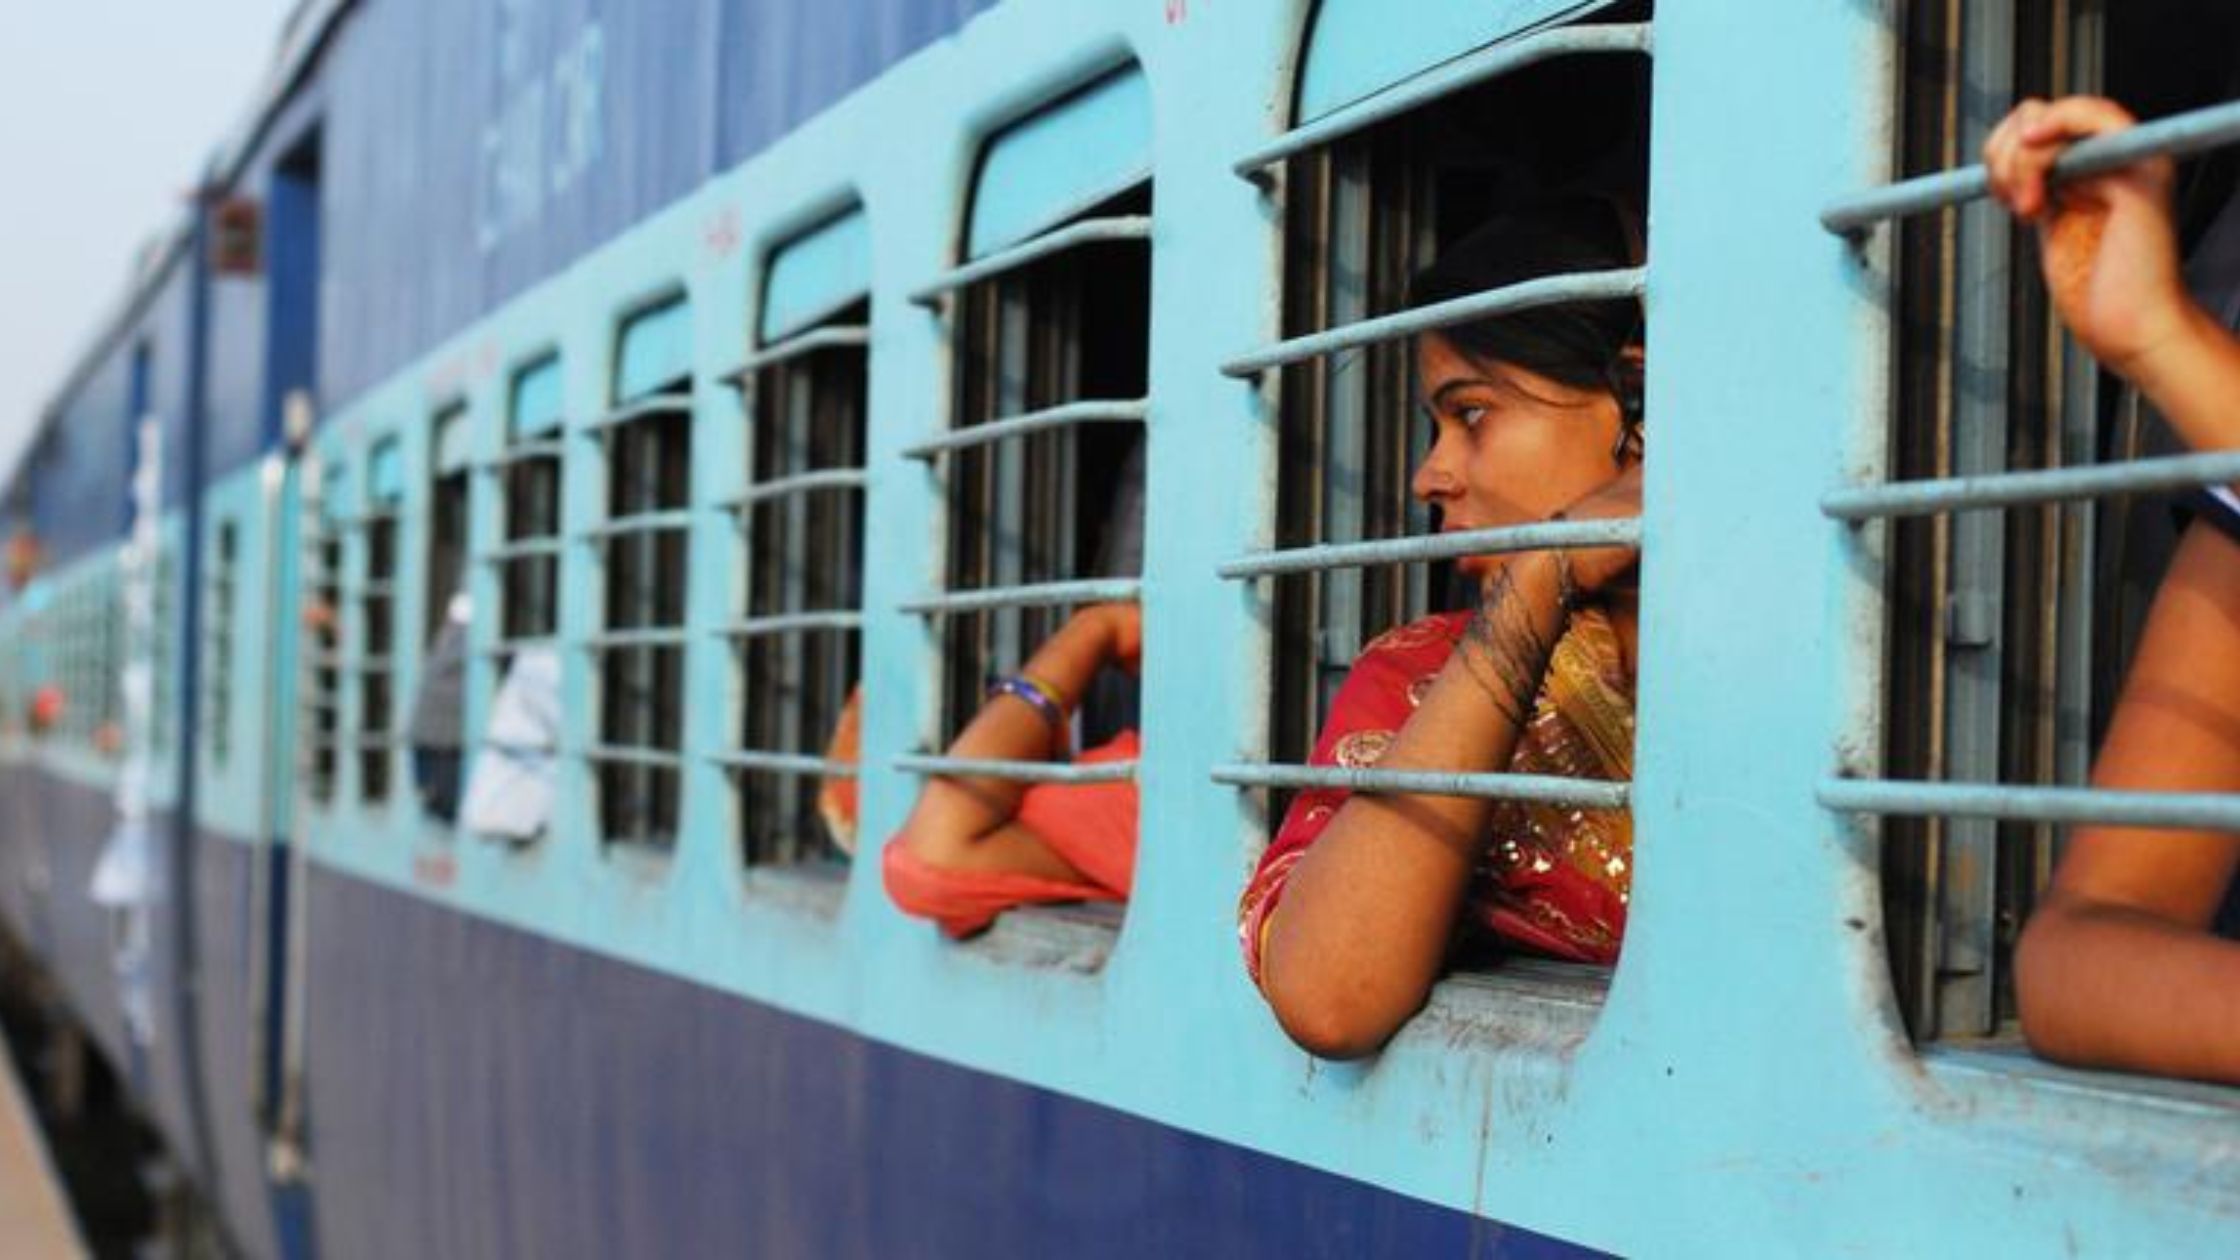 railway suspends trains running from morning 4 am to 8 pm evening in bihar